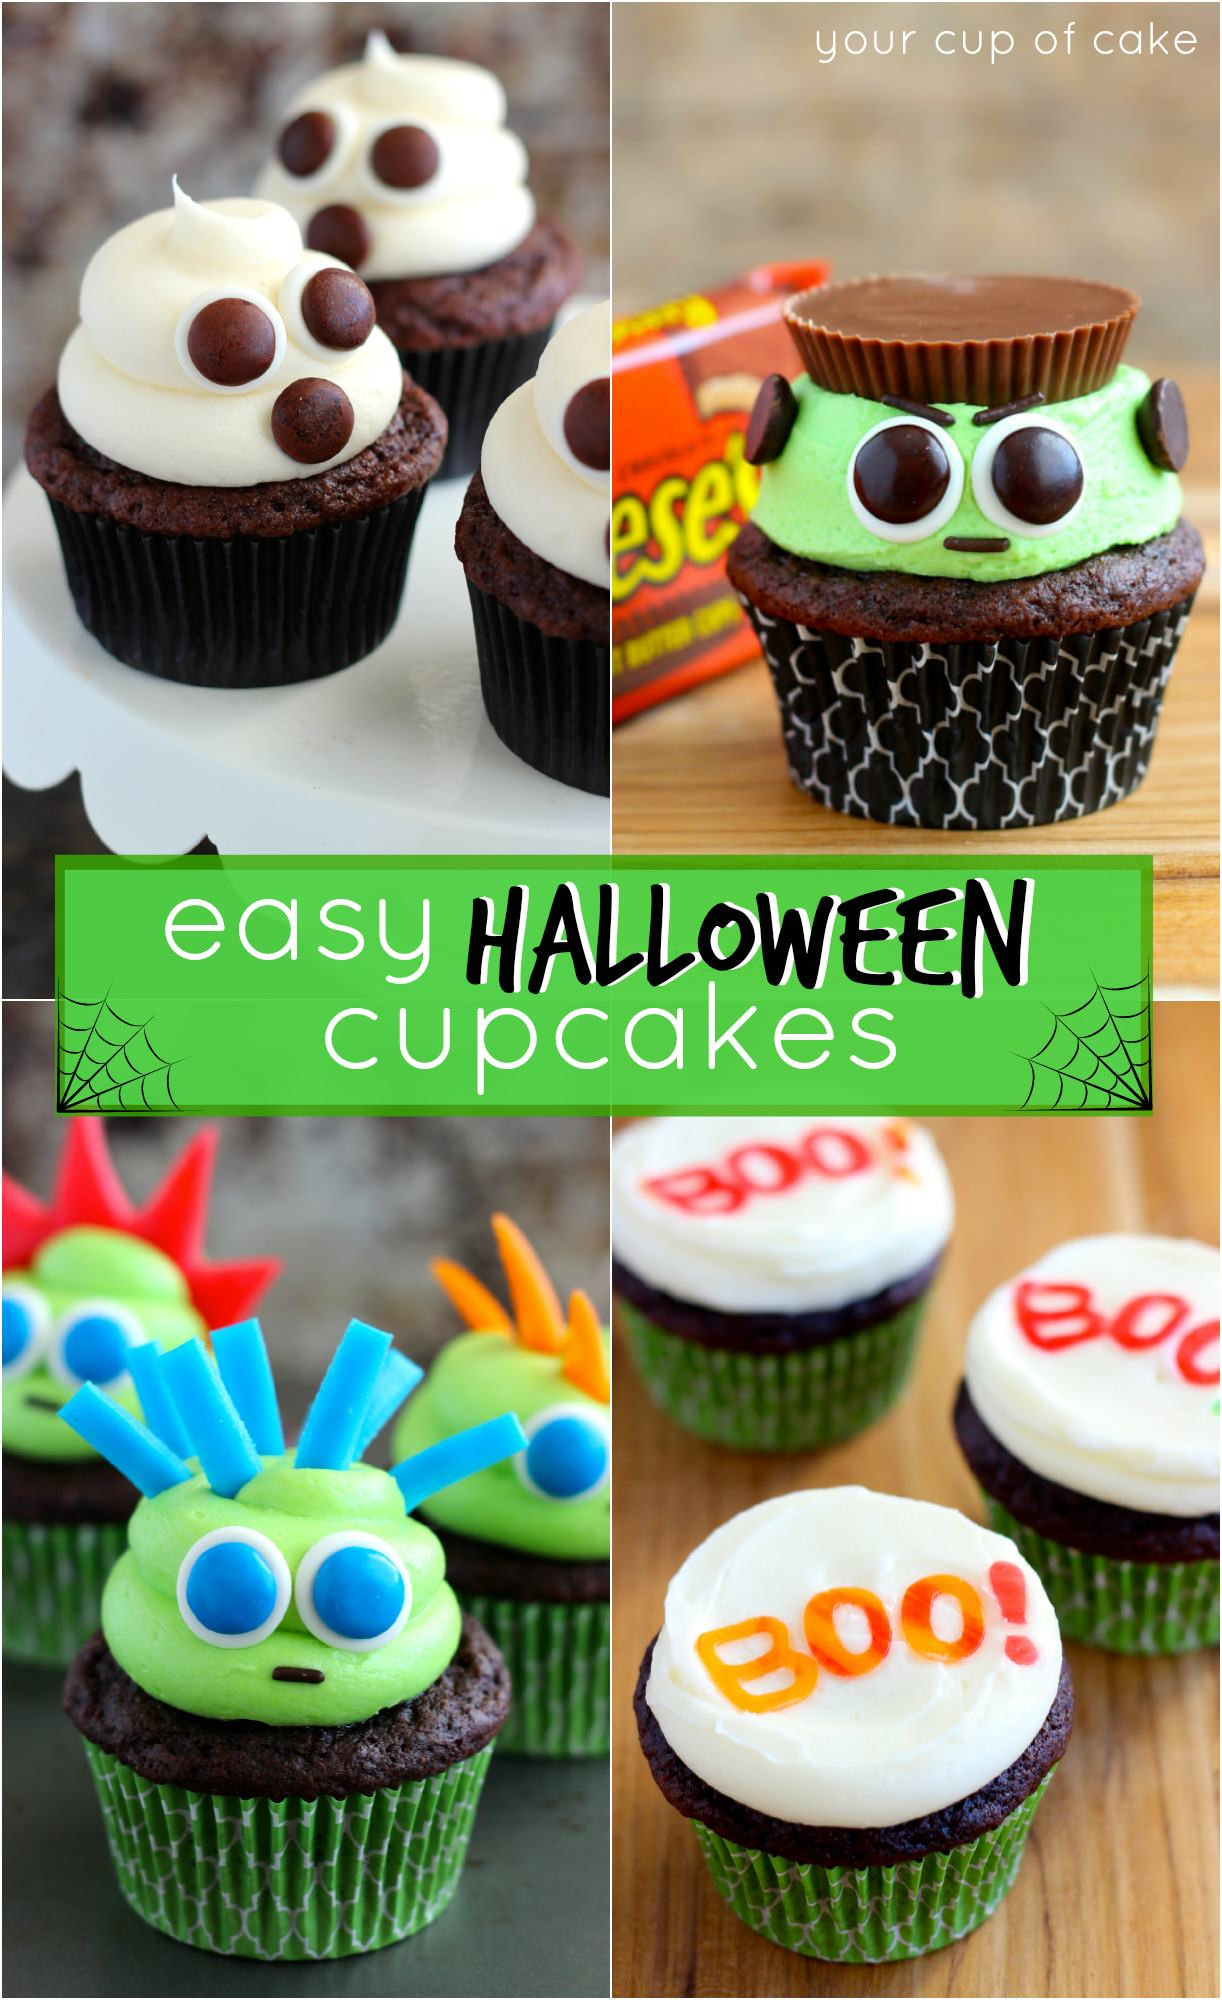 Simple Halloween Cakes
 Easy Halloween Cupcake Ideas Your Cup of Cake